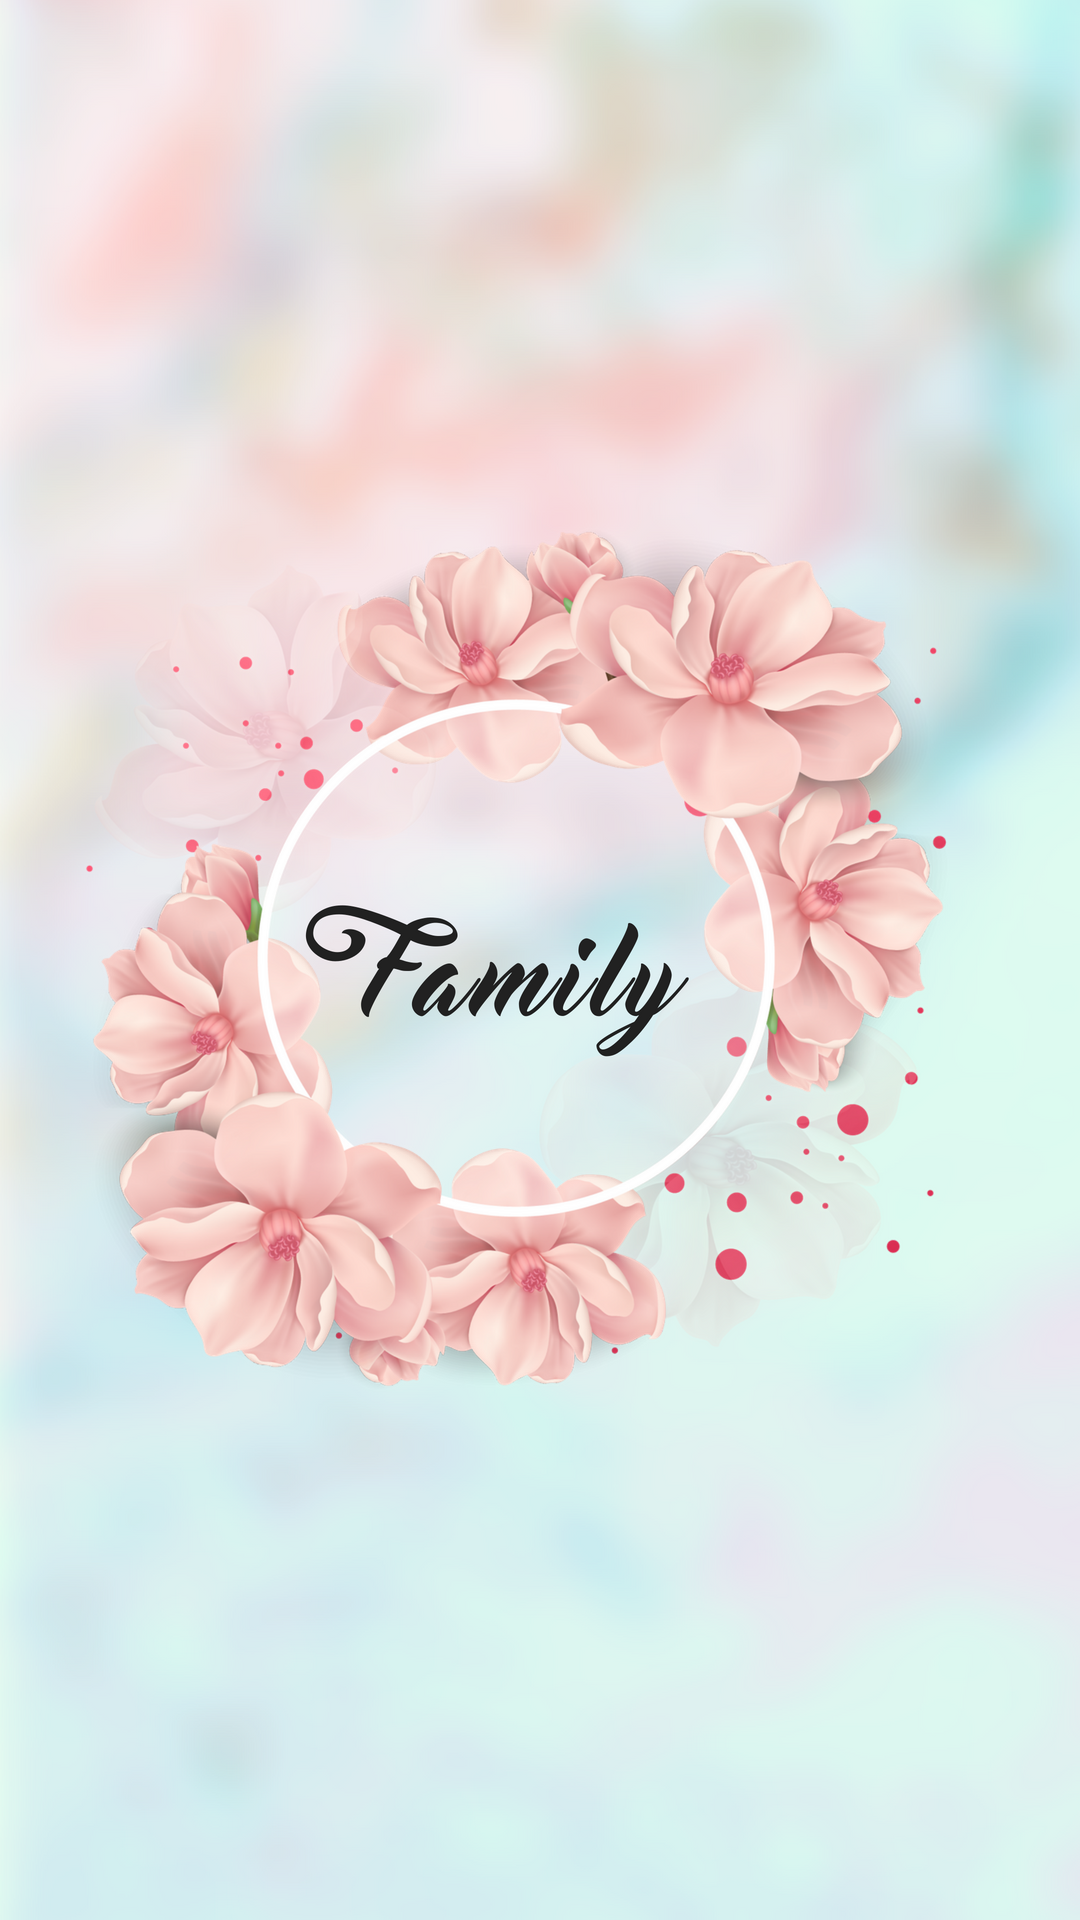 My Family Wallpapers